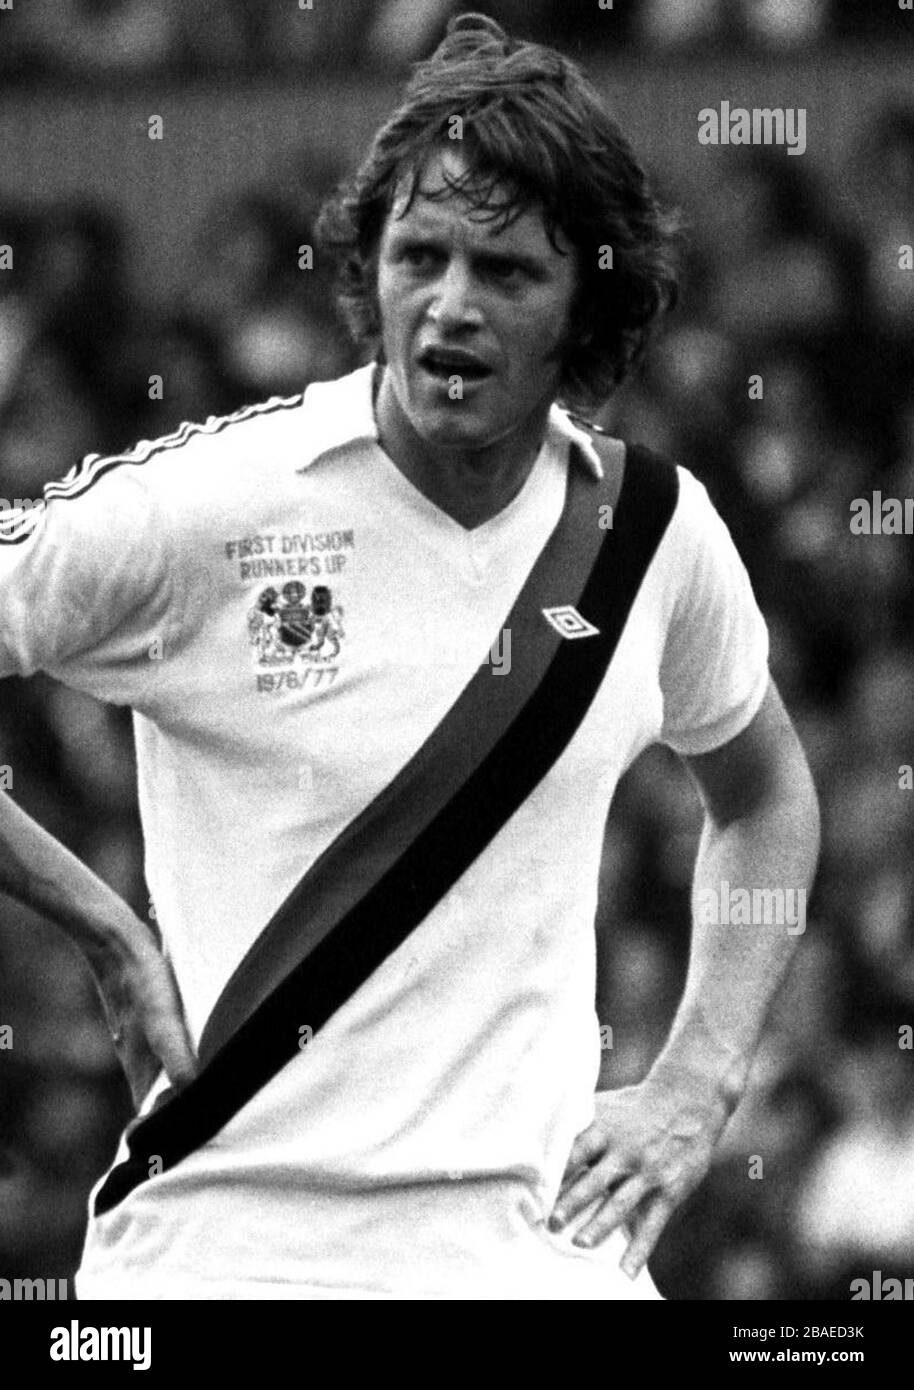 Mick Channon, Manchester City ... Soccer - Football League Division One - West Ham United  v Manchester City ... 29-08-1978 ... NULL ... NULL ... Photo credit should read: S&G/S&G and Barratts. Unique Reference No. 398565 ... NULL Stock Photo